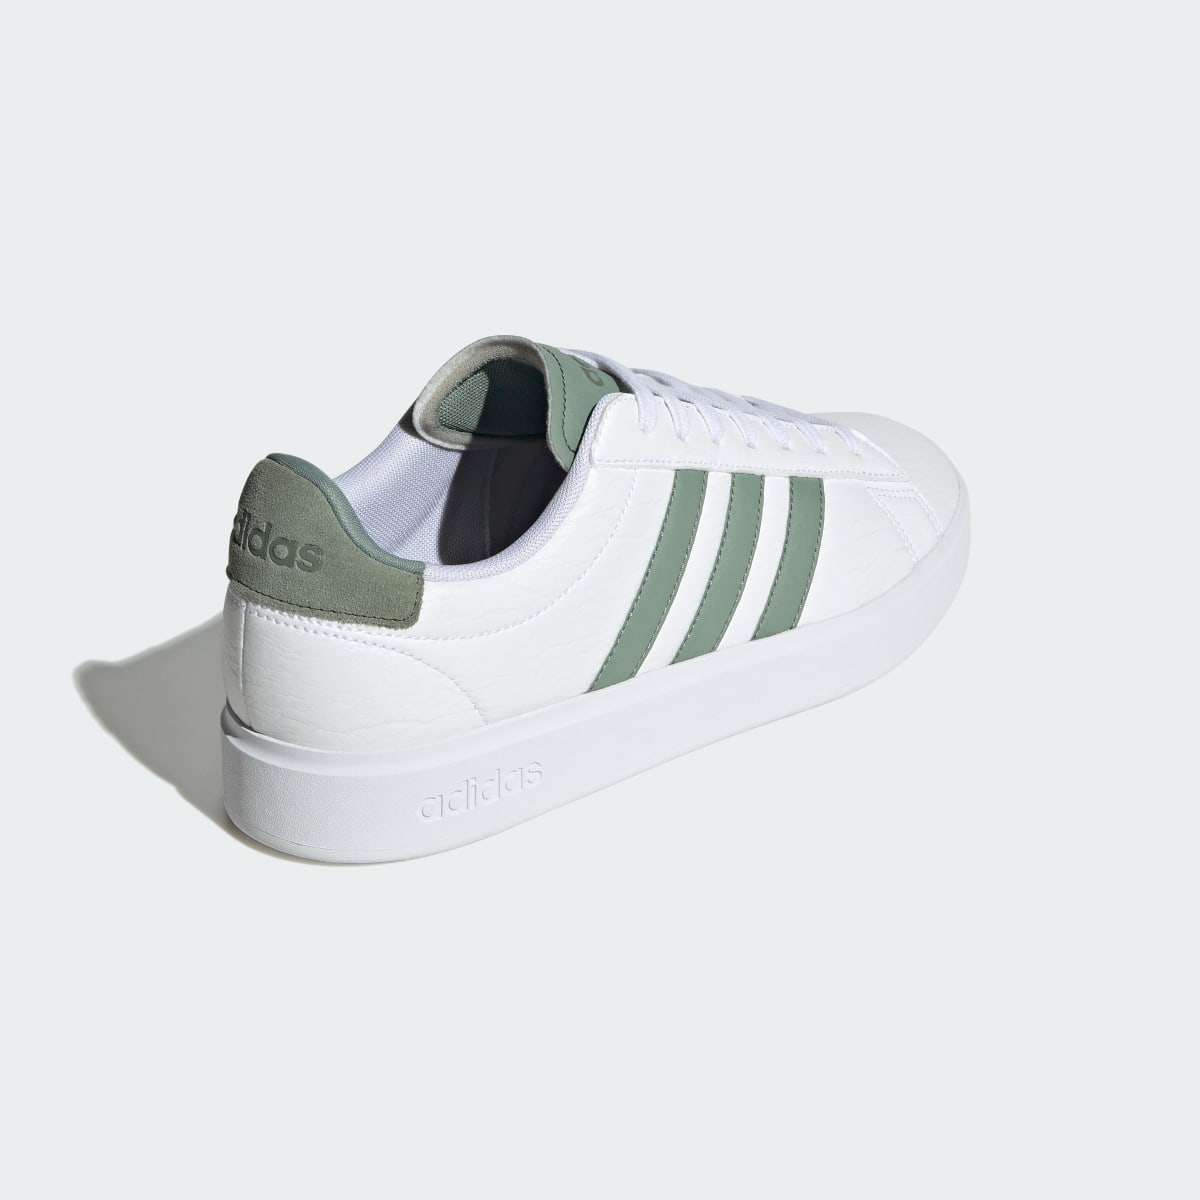 Adidas Grand Court 2.0 Shoes. 6